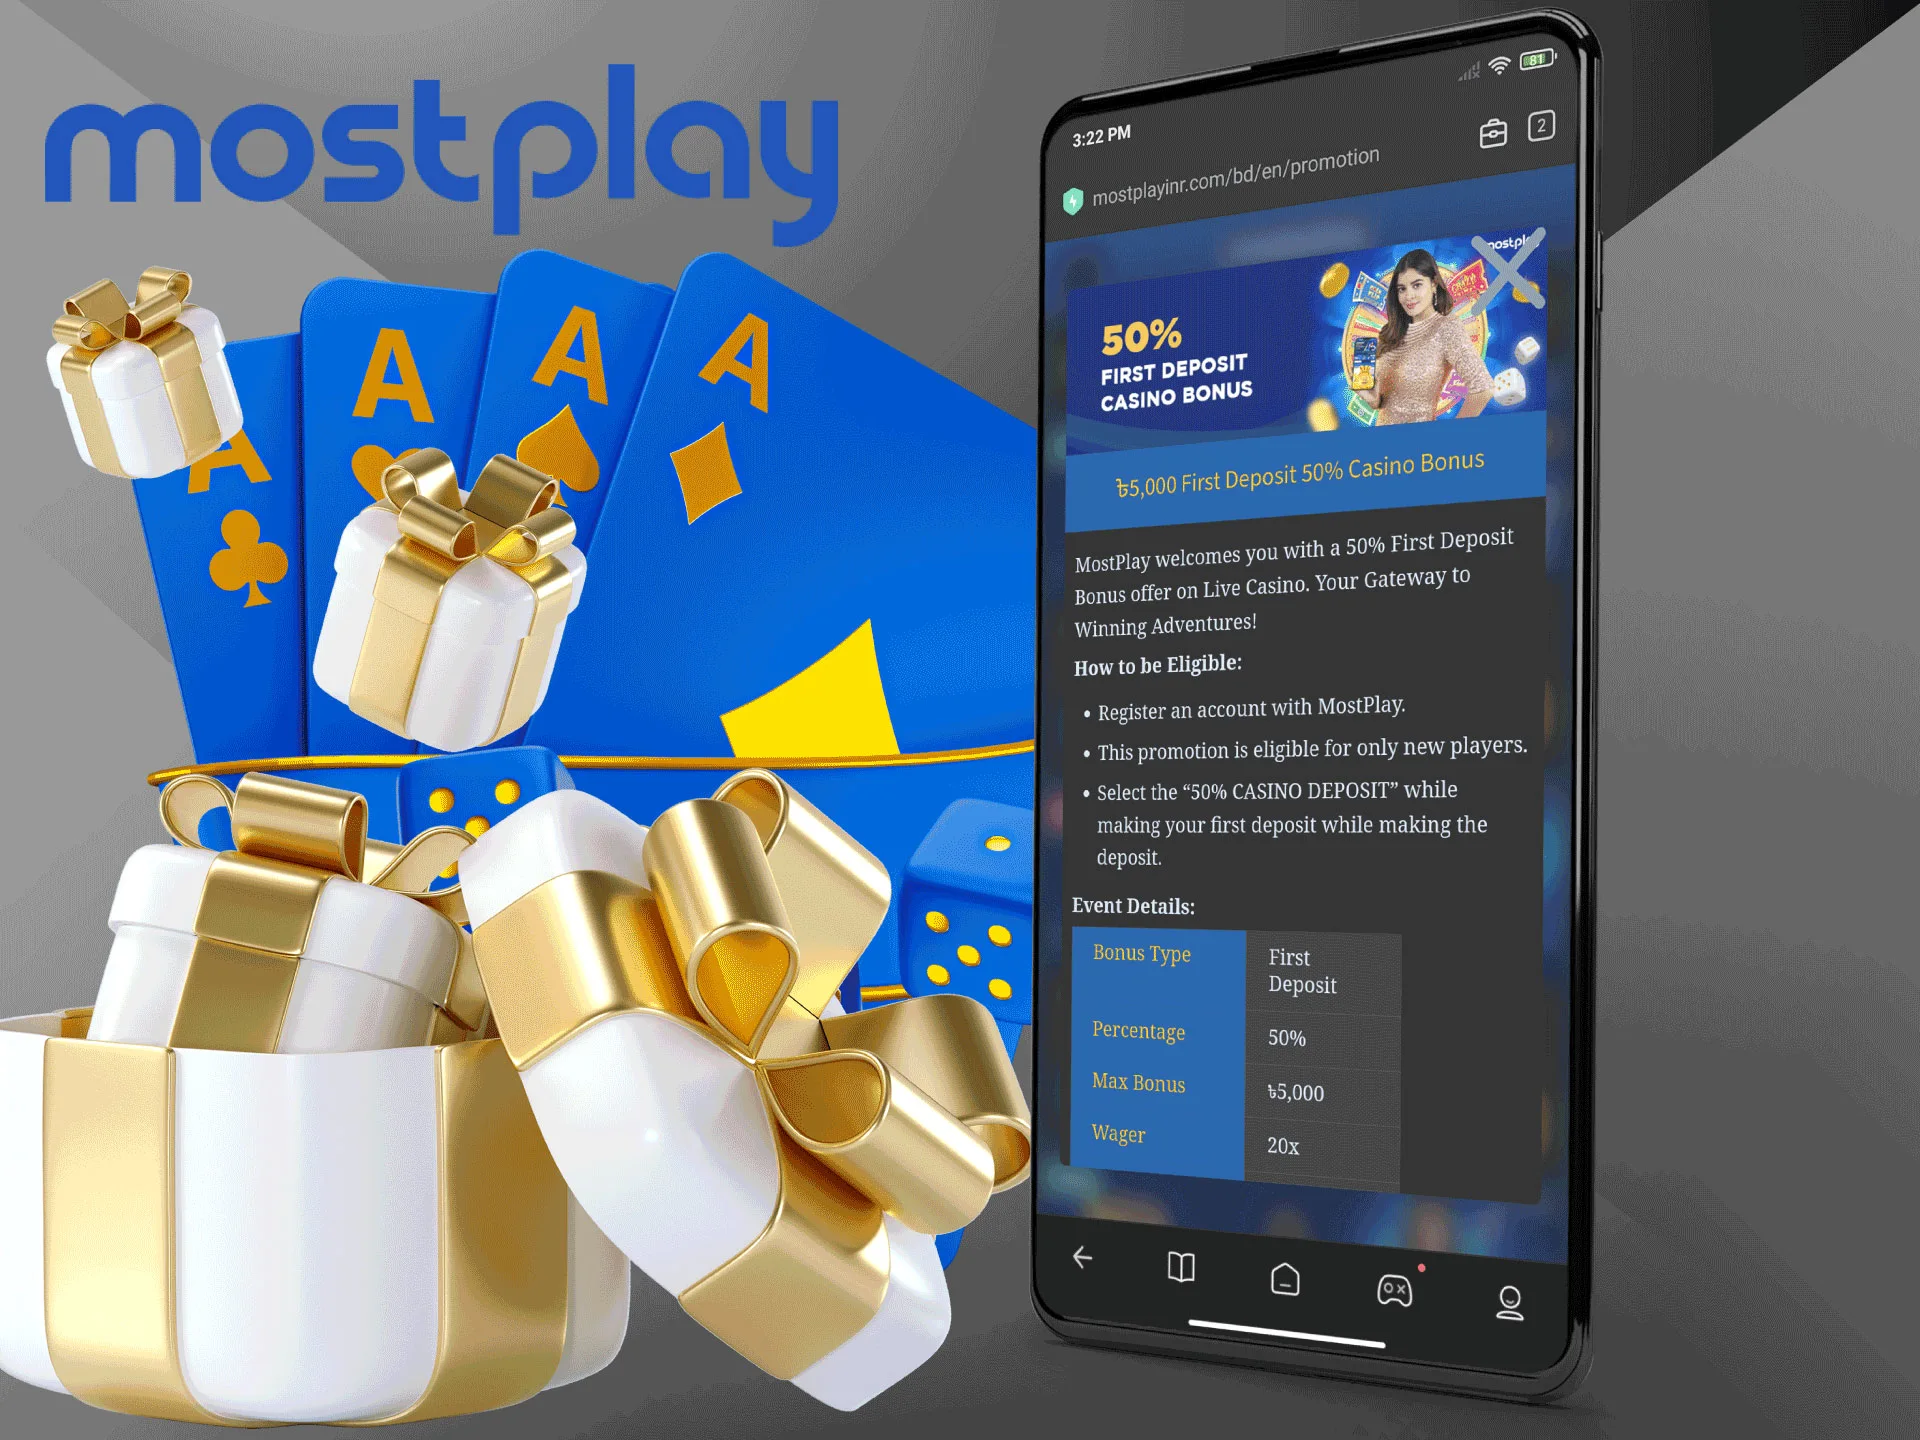 You will be swept away by an avalanche of real prizes from Mostplay.